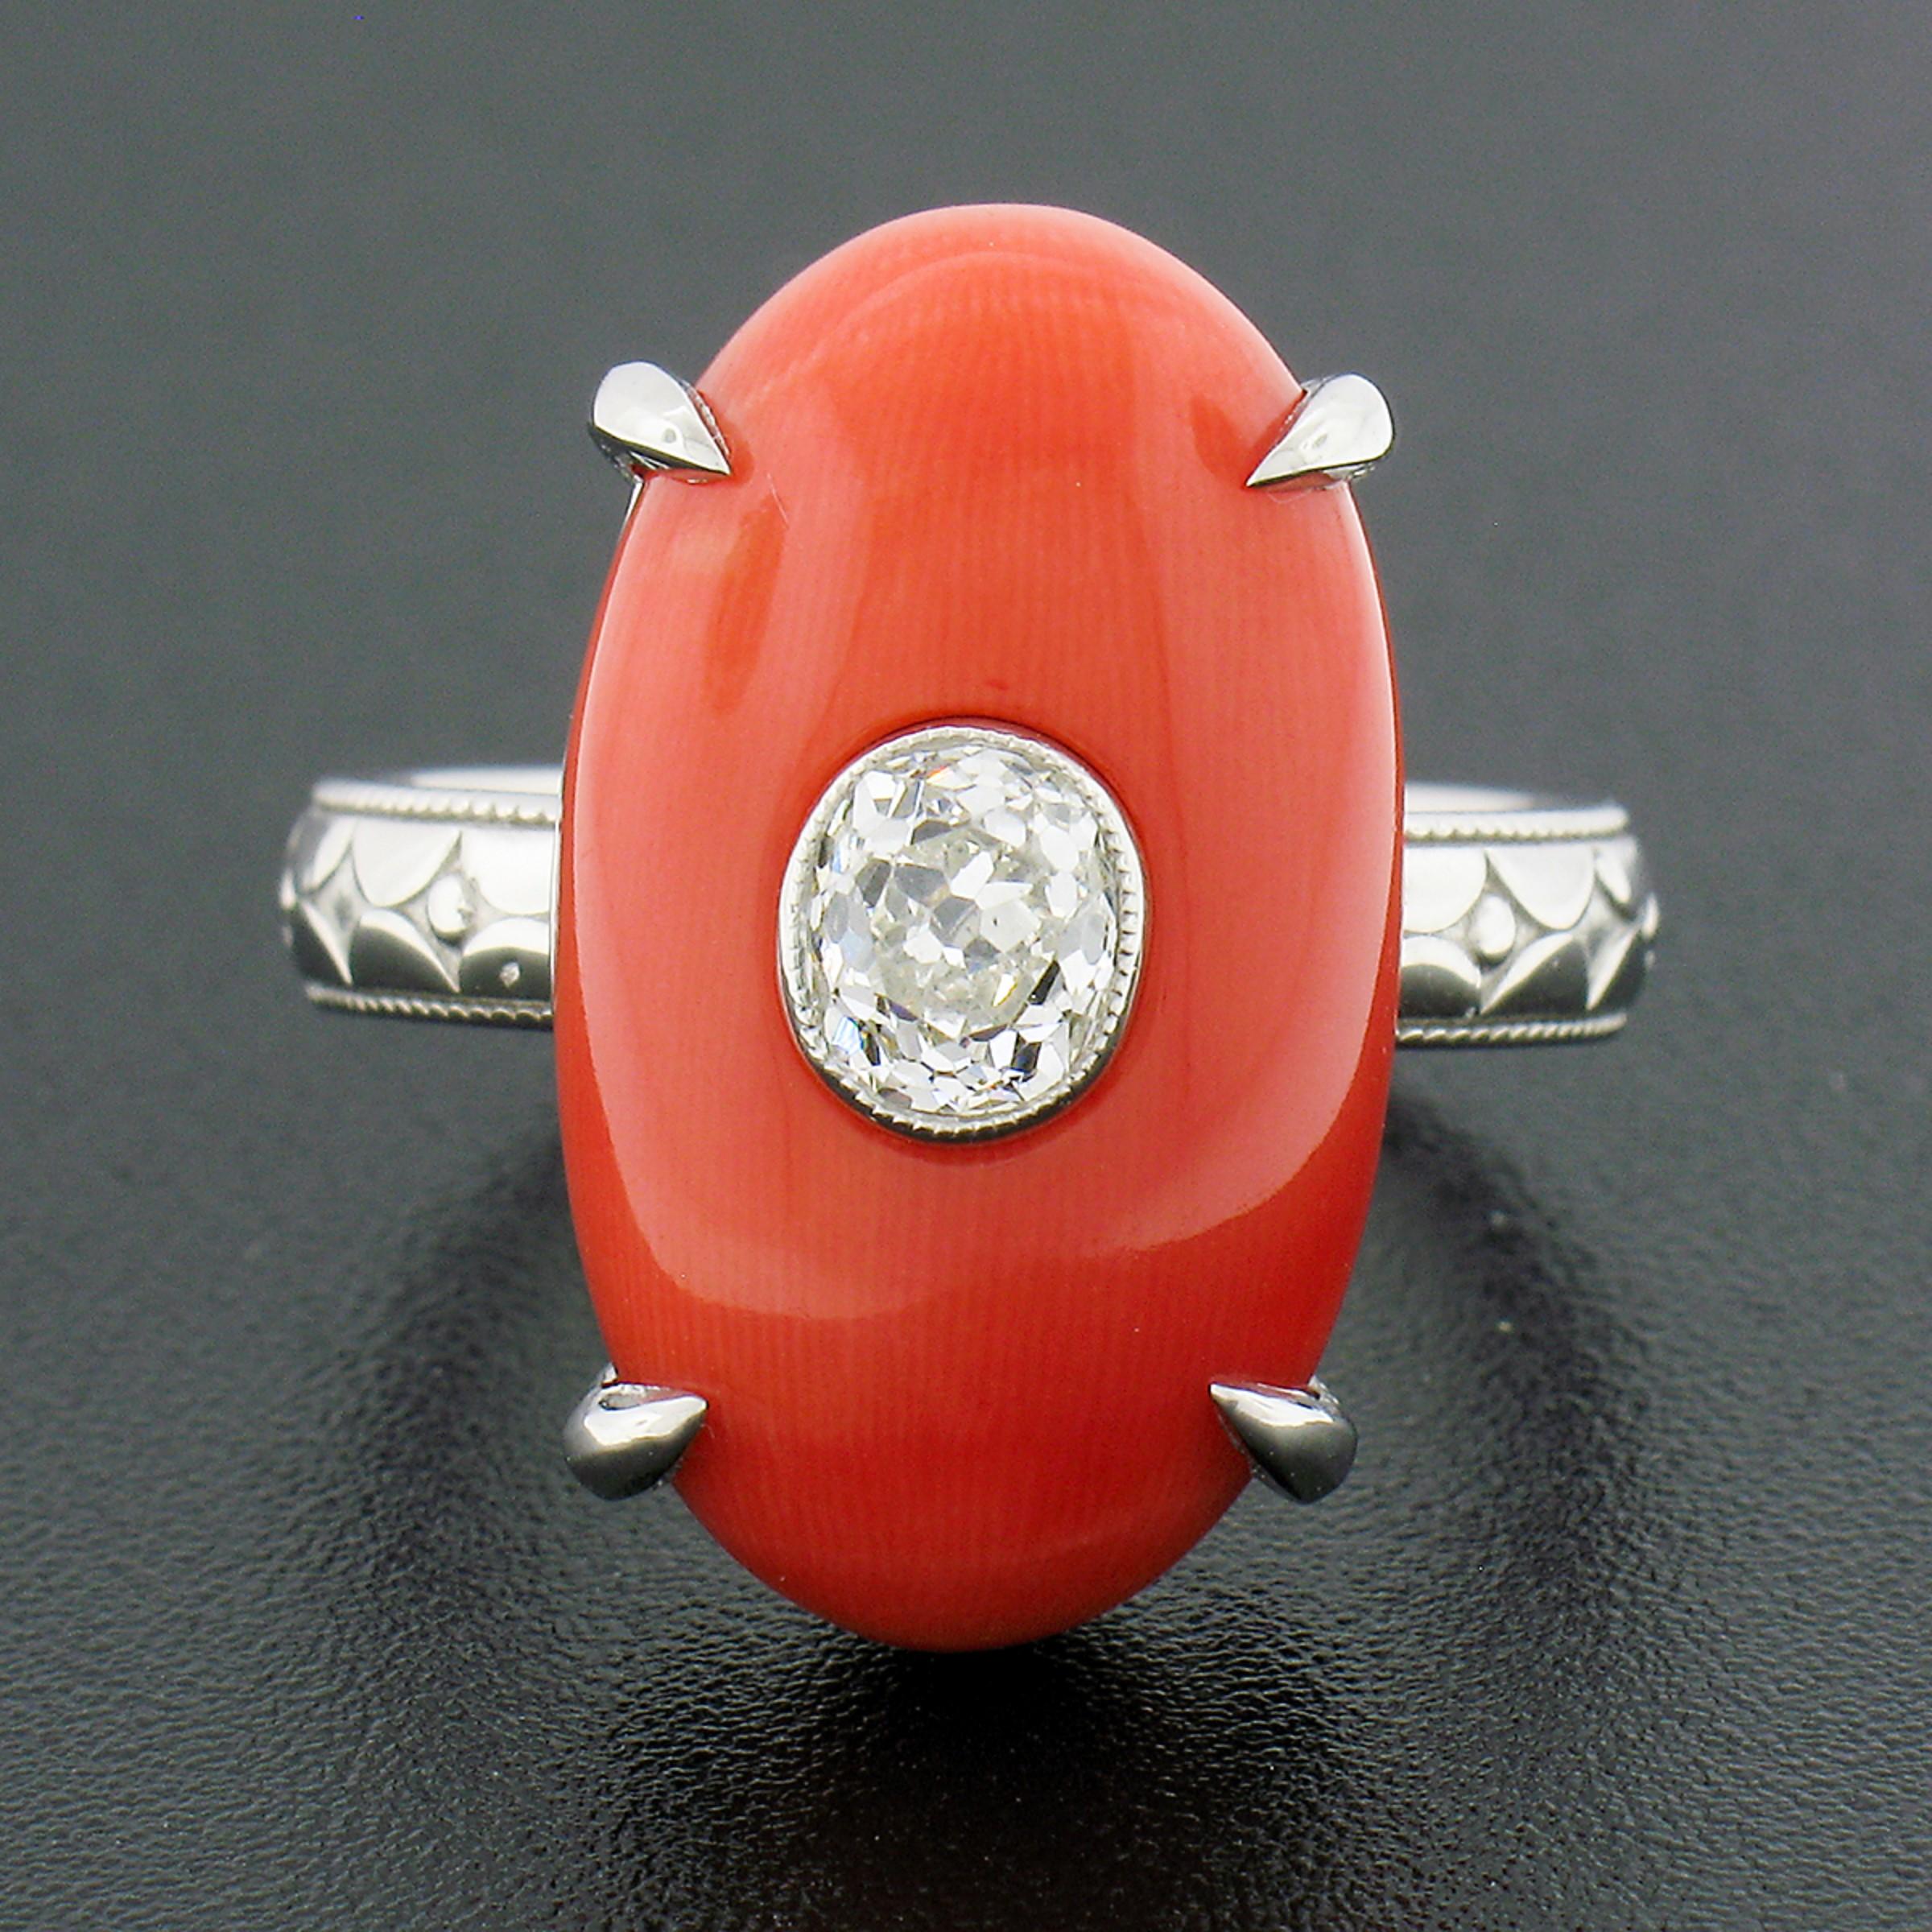 This truly unique statement ring was newly crafted from solid 950 platinum. The ring features an oval cabochon cut piece of natural coral claw prong set at its center. The coral is GIA certified, measures exactly 20.33x11.88mm, and displays a very